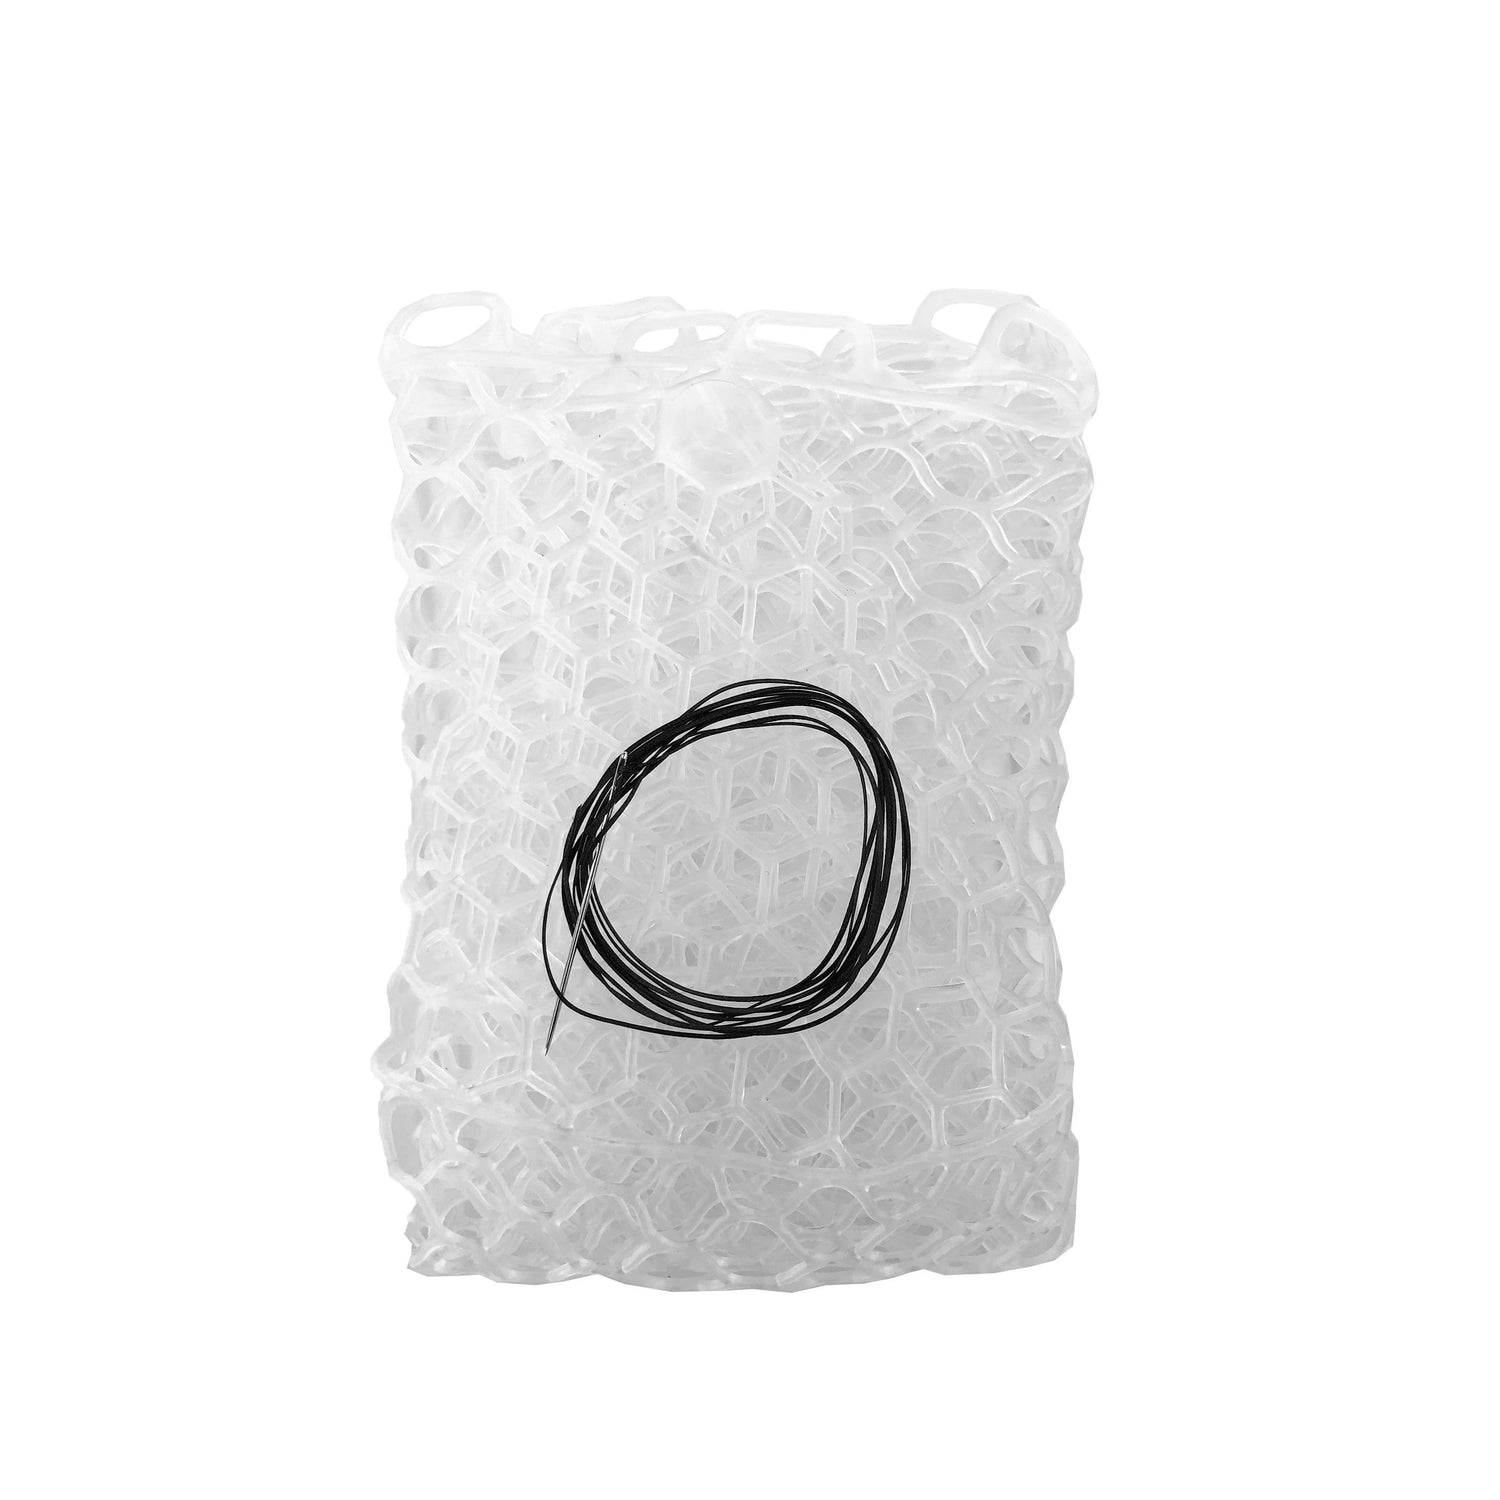 Replacement Fishing Net Bag for Fish Catcher - Reinforced Fishing Supplies